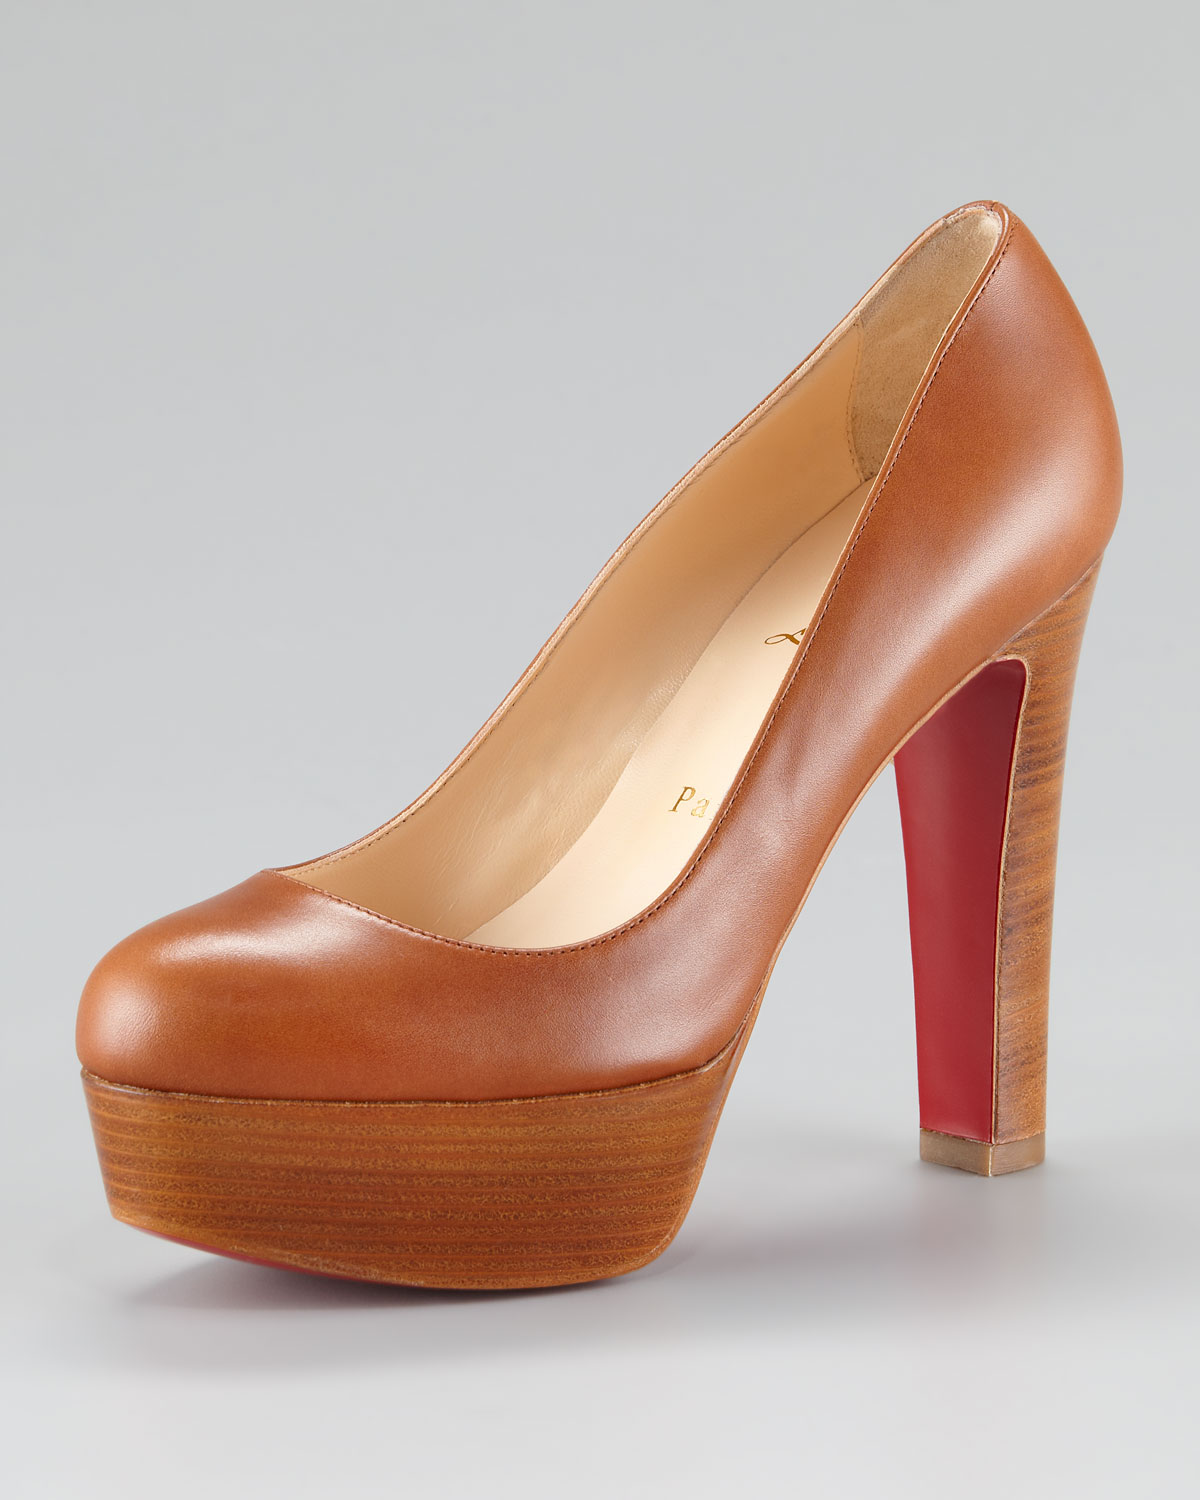 Artesur ? christian louboutin sandals Brown leather short stacked ...